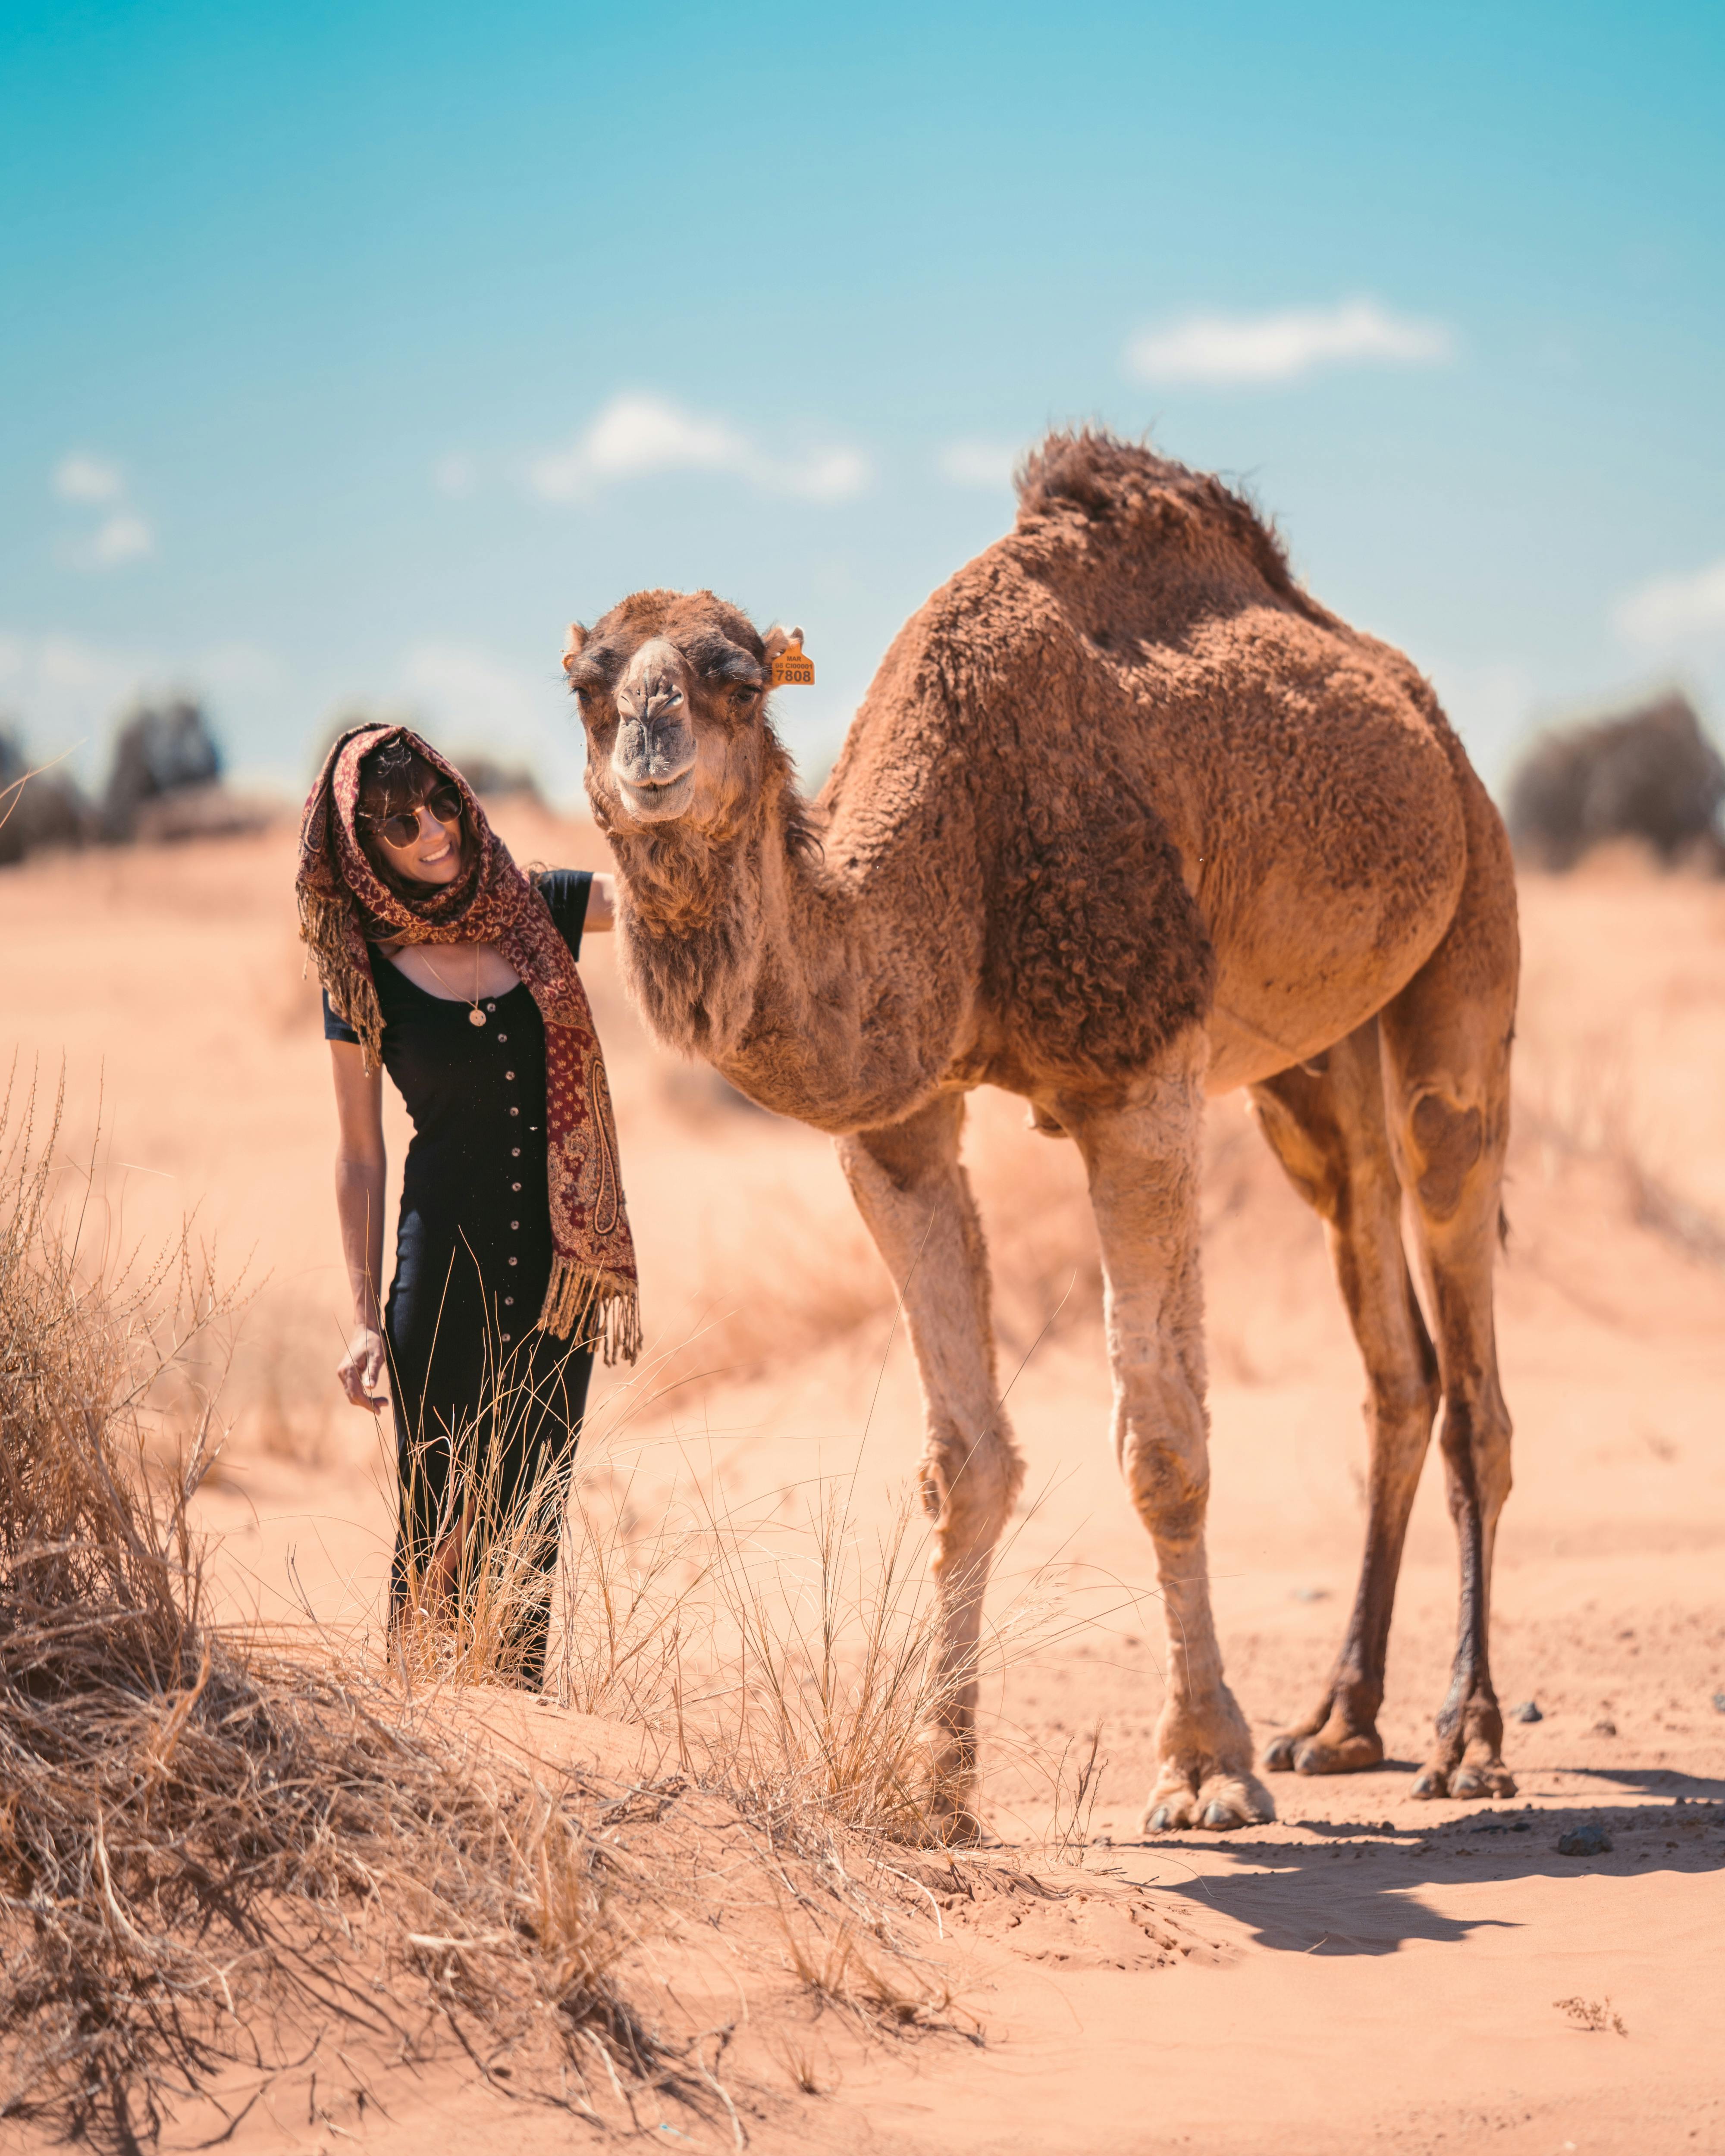 Camel 4K wallpapers for your desktop or mobile screen free and easy to  download